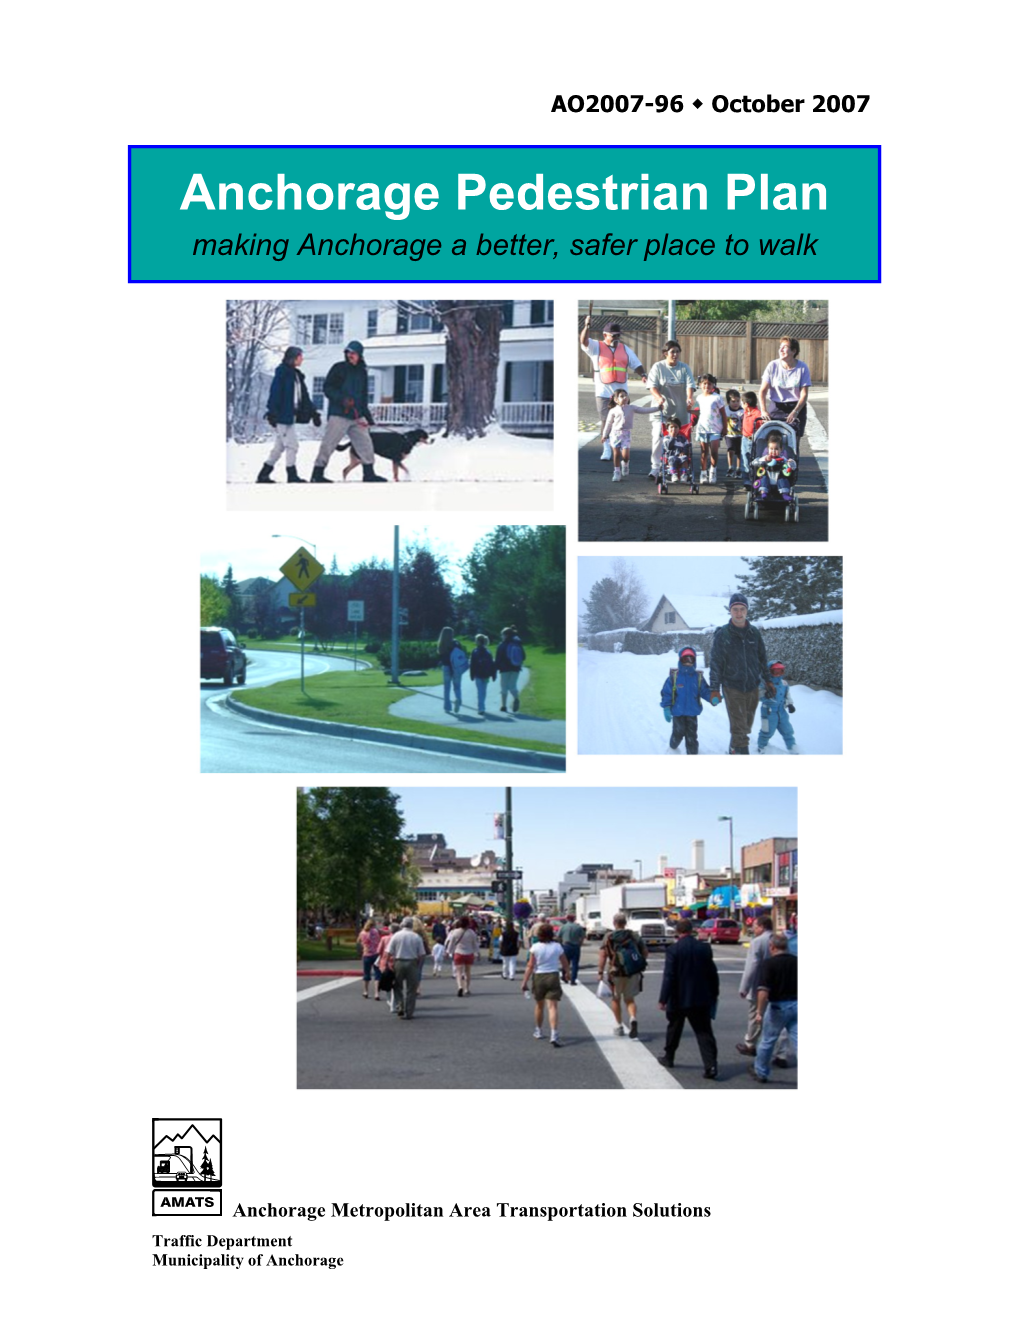 Anchorage Pedestrian Plan Making Anchorage a Better, Safer Place to Walk